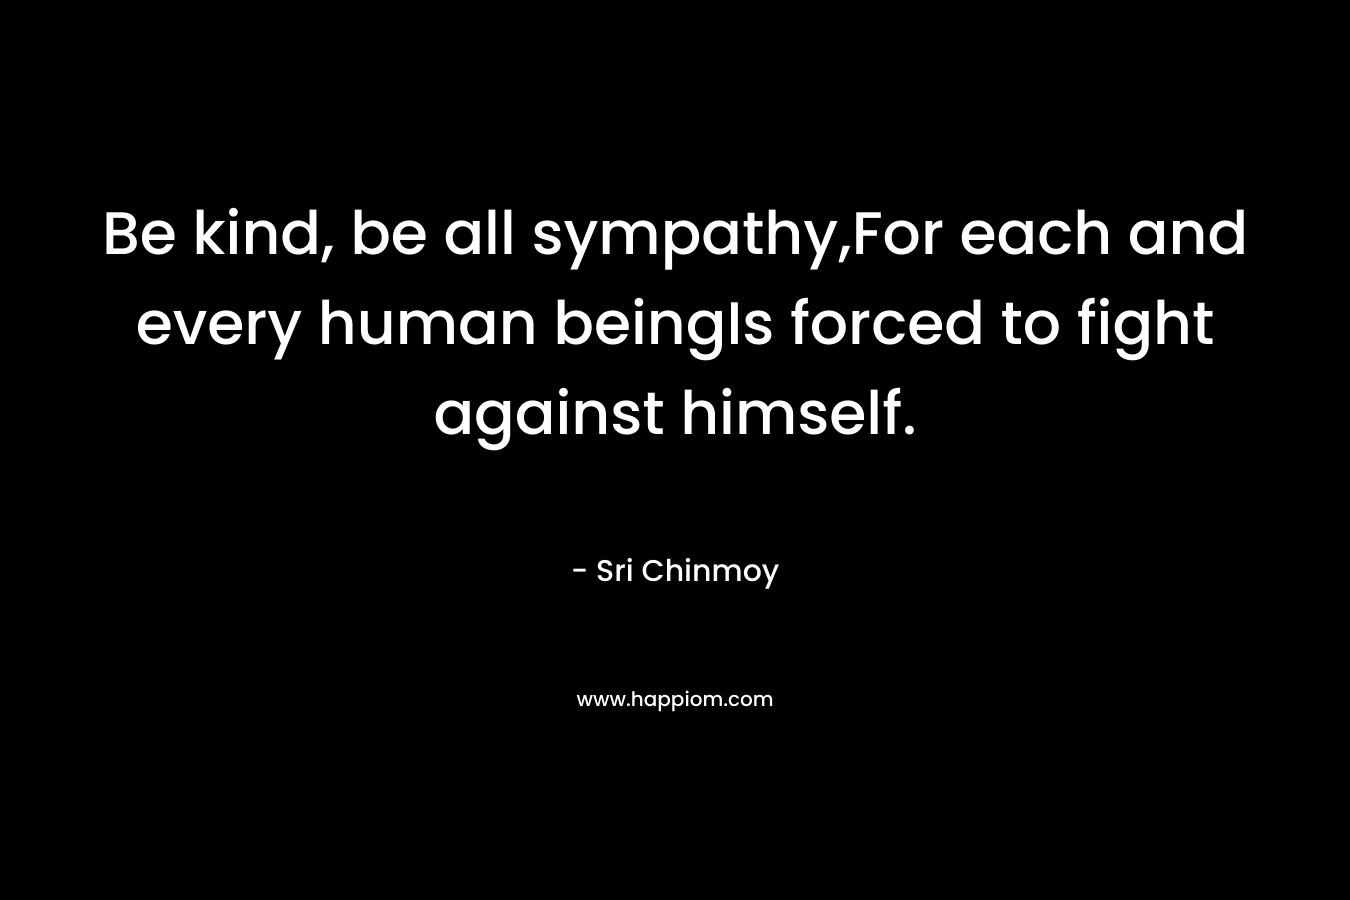 Be kind, be all sympathy,For each and every human beingIs forced to fight against himself. – Sri Chinmoy